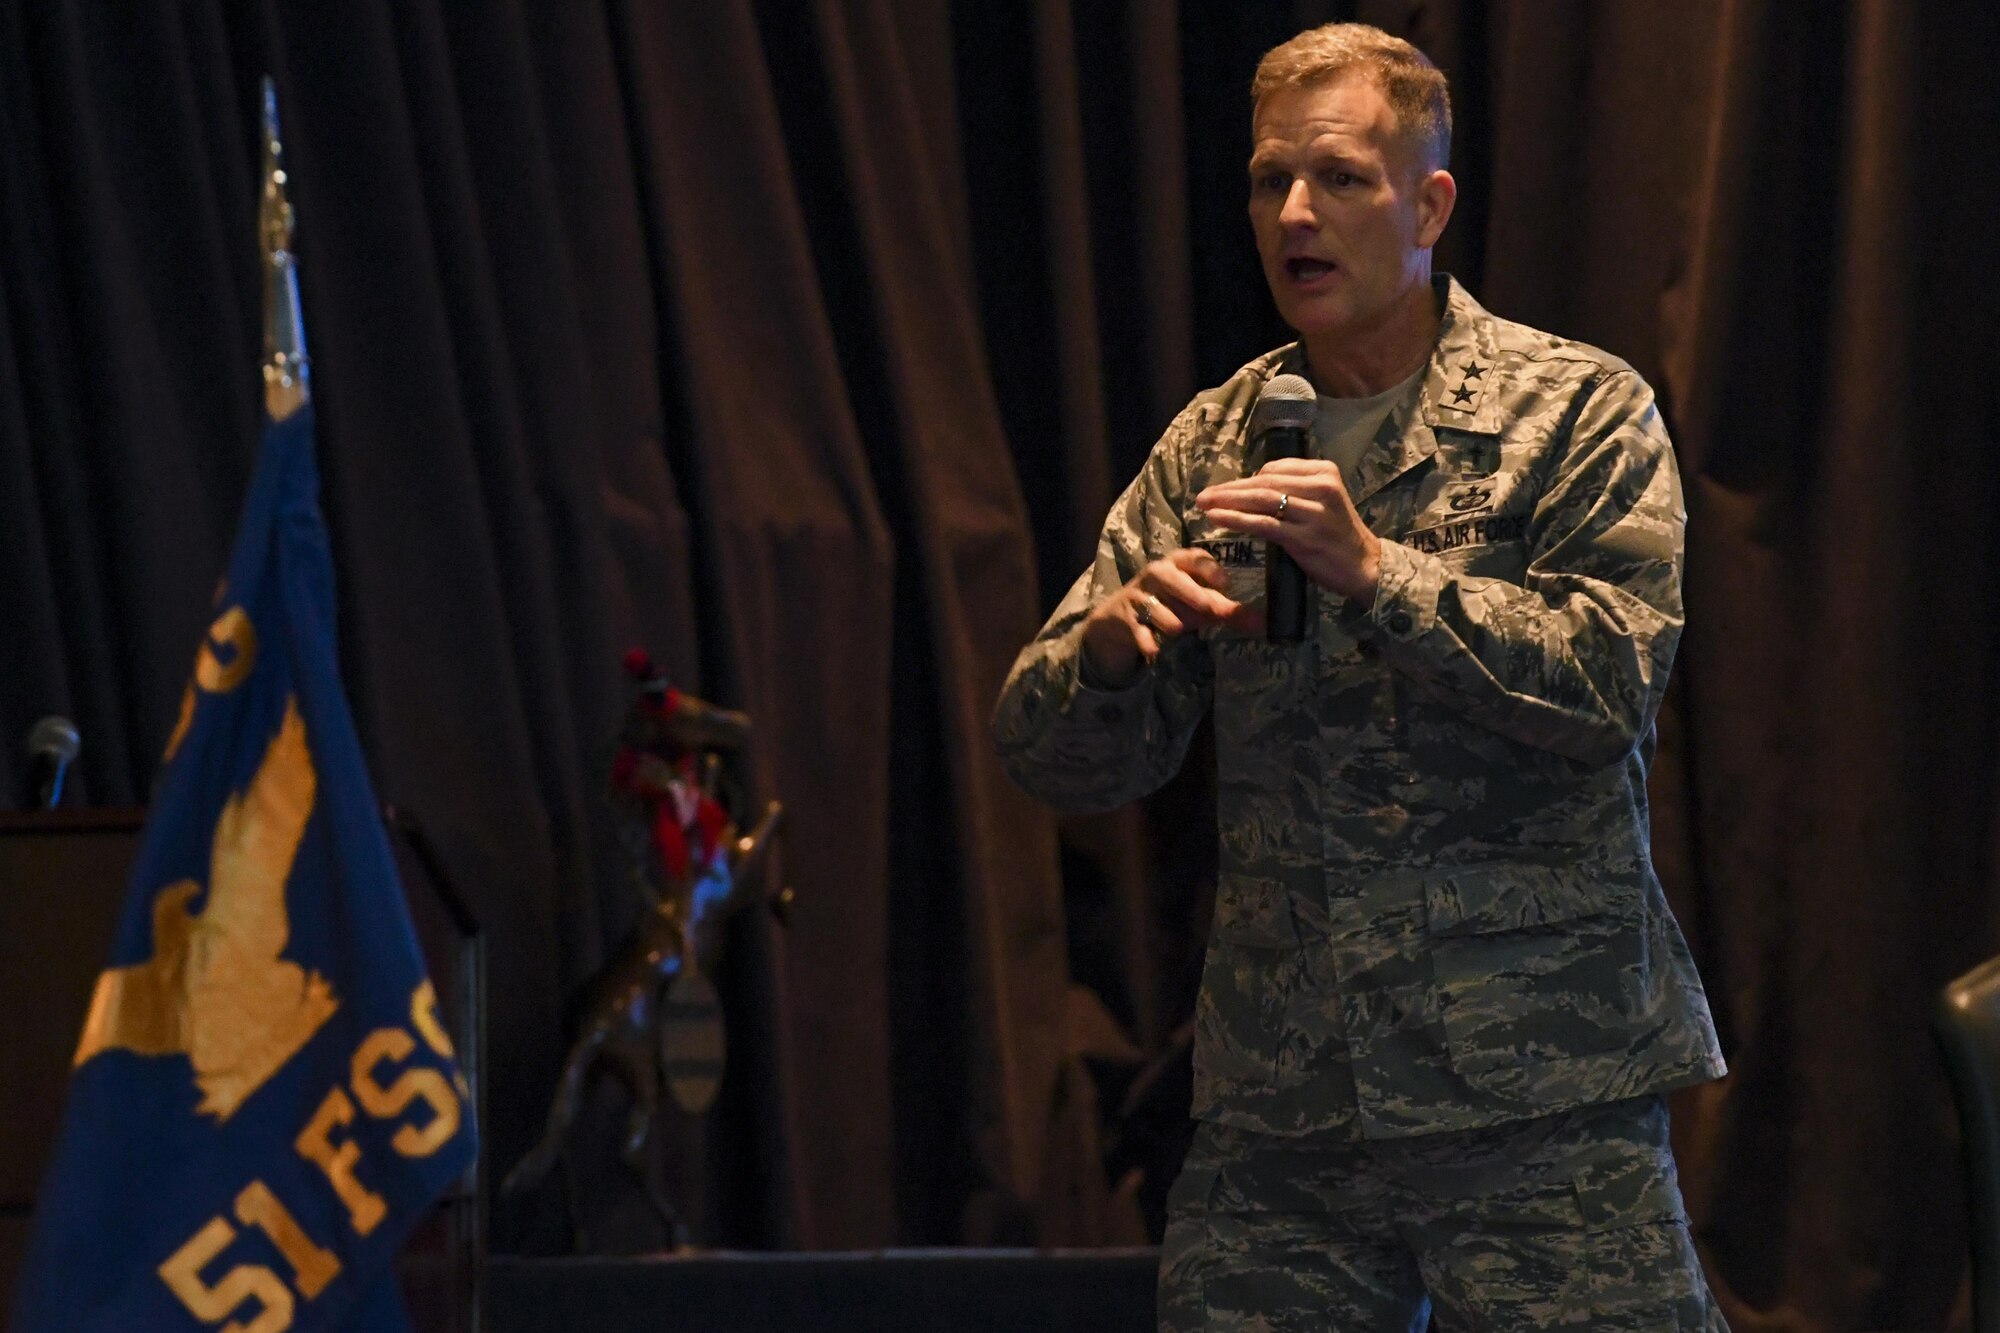 Chap. (Maj. Gen.) Dondi E. Costin, Air Force Chief of Chaplains, speaks to a crowd of Airmen and family members at Osan Air Base, Republic of Korea, Dec. 29, 2016. Costin visited Osan to learn about the challenges faced by Airmen and their families firsthand, while also taking the opportunity to spread his message of resiliency. (U.S. Air Force photo by Senior Airman Victor J. Caputo)